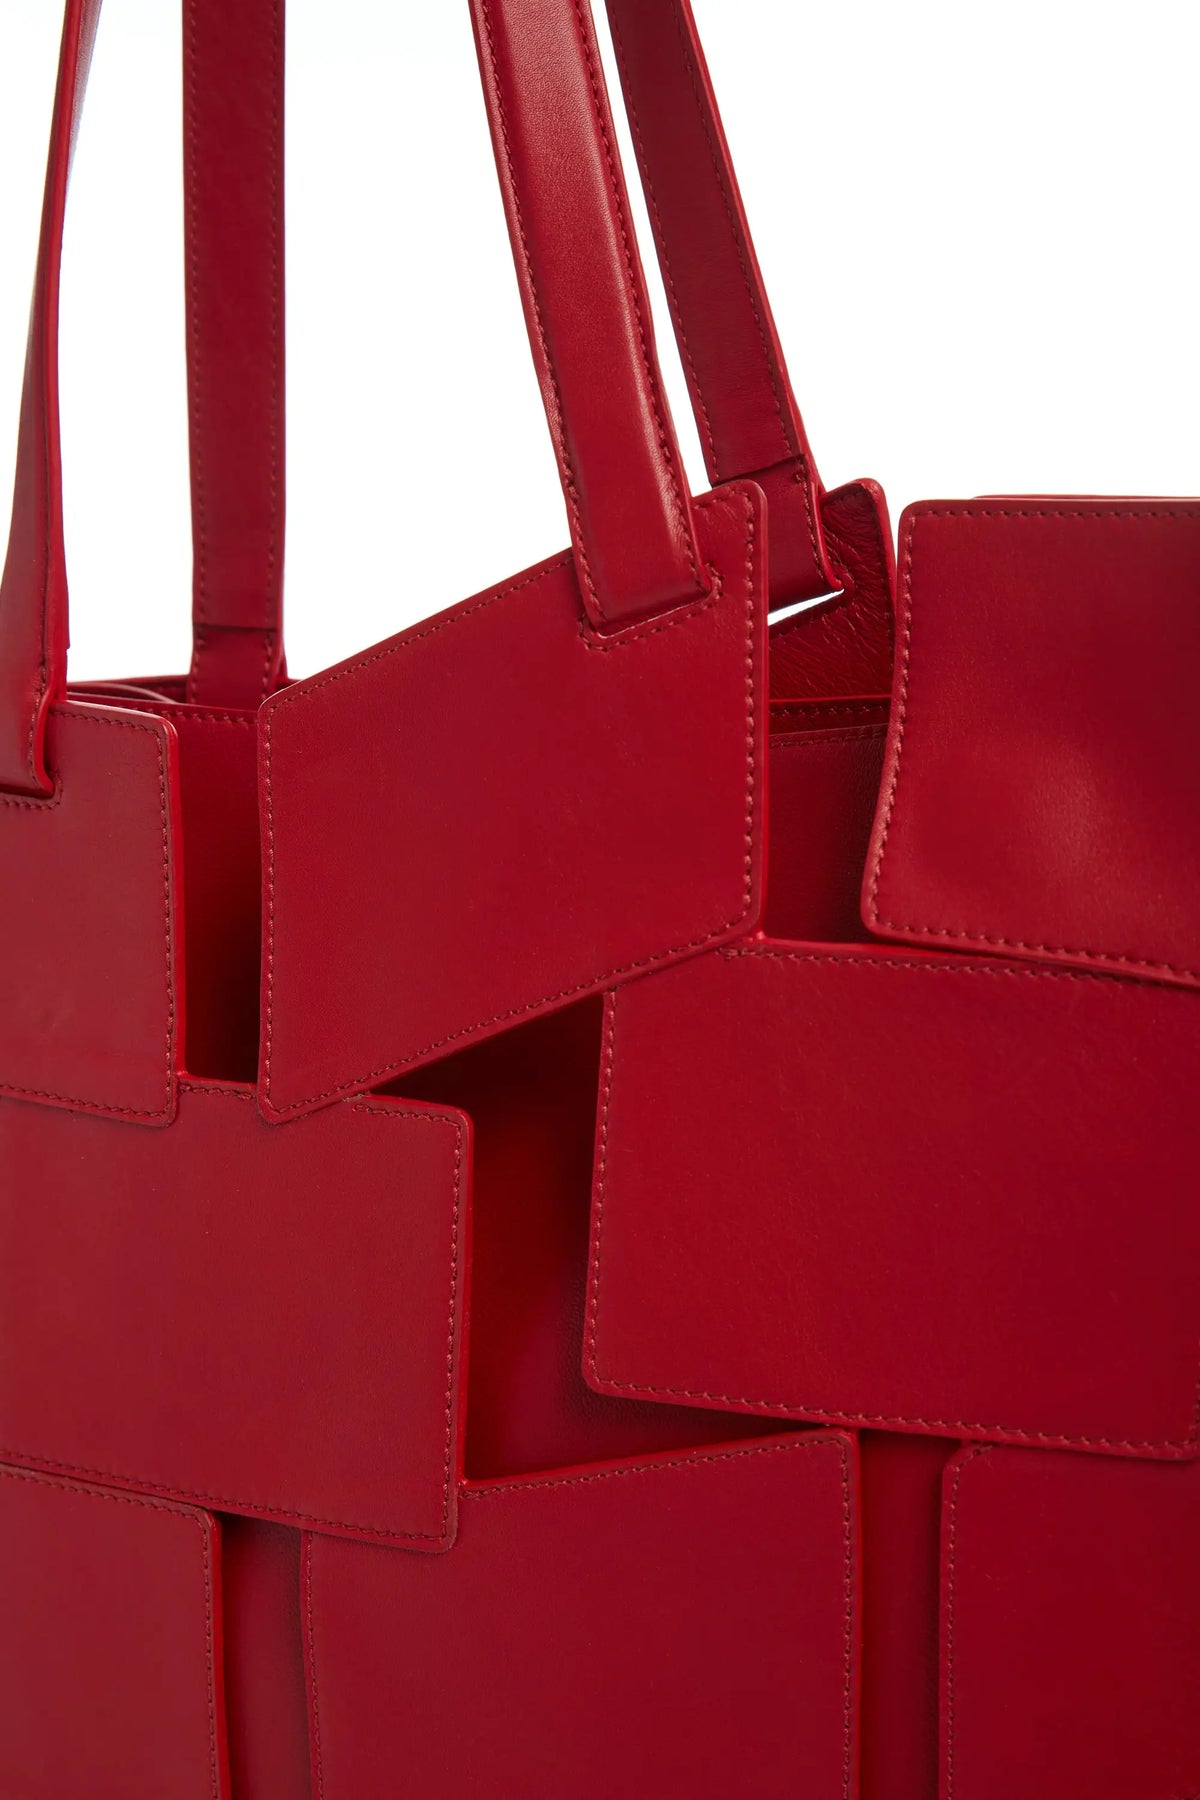 Lacquered Tote Bag in Red Topaz Patchwork Leather